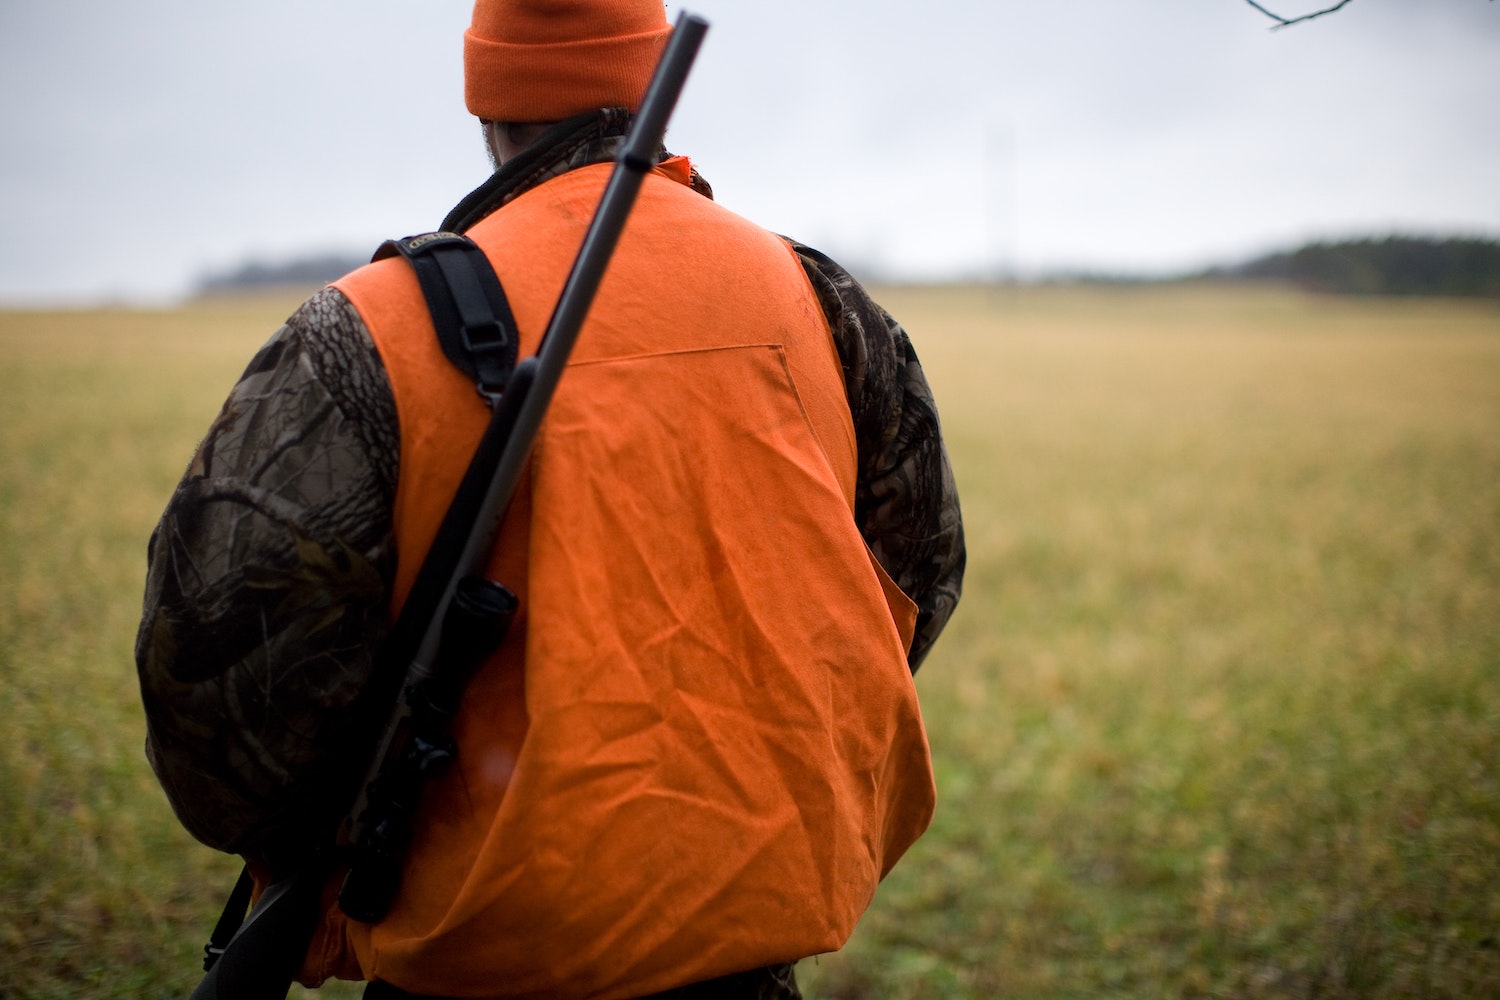 Fewer hunters bought licenses this year, but it was only a slight decline